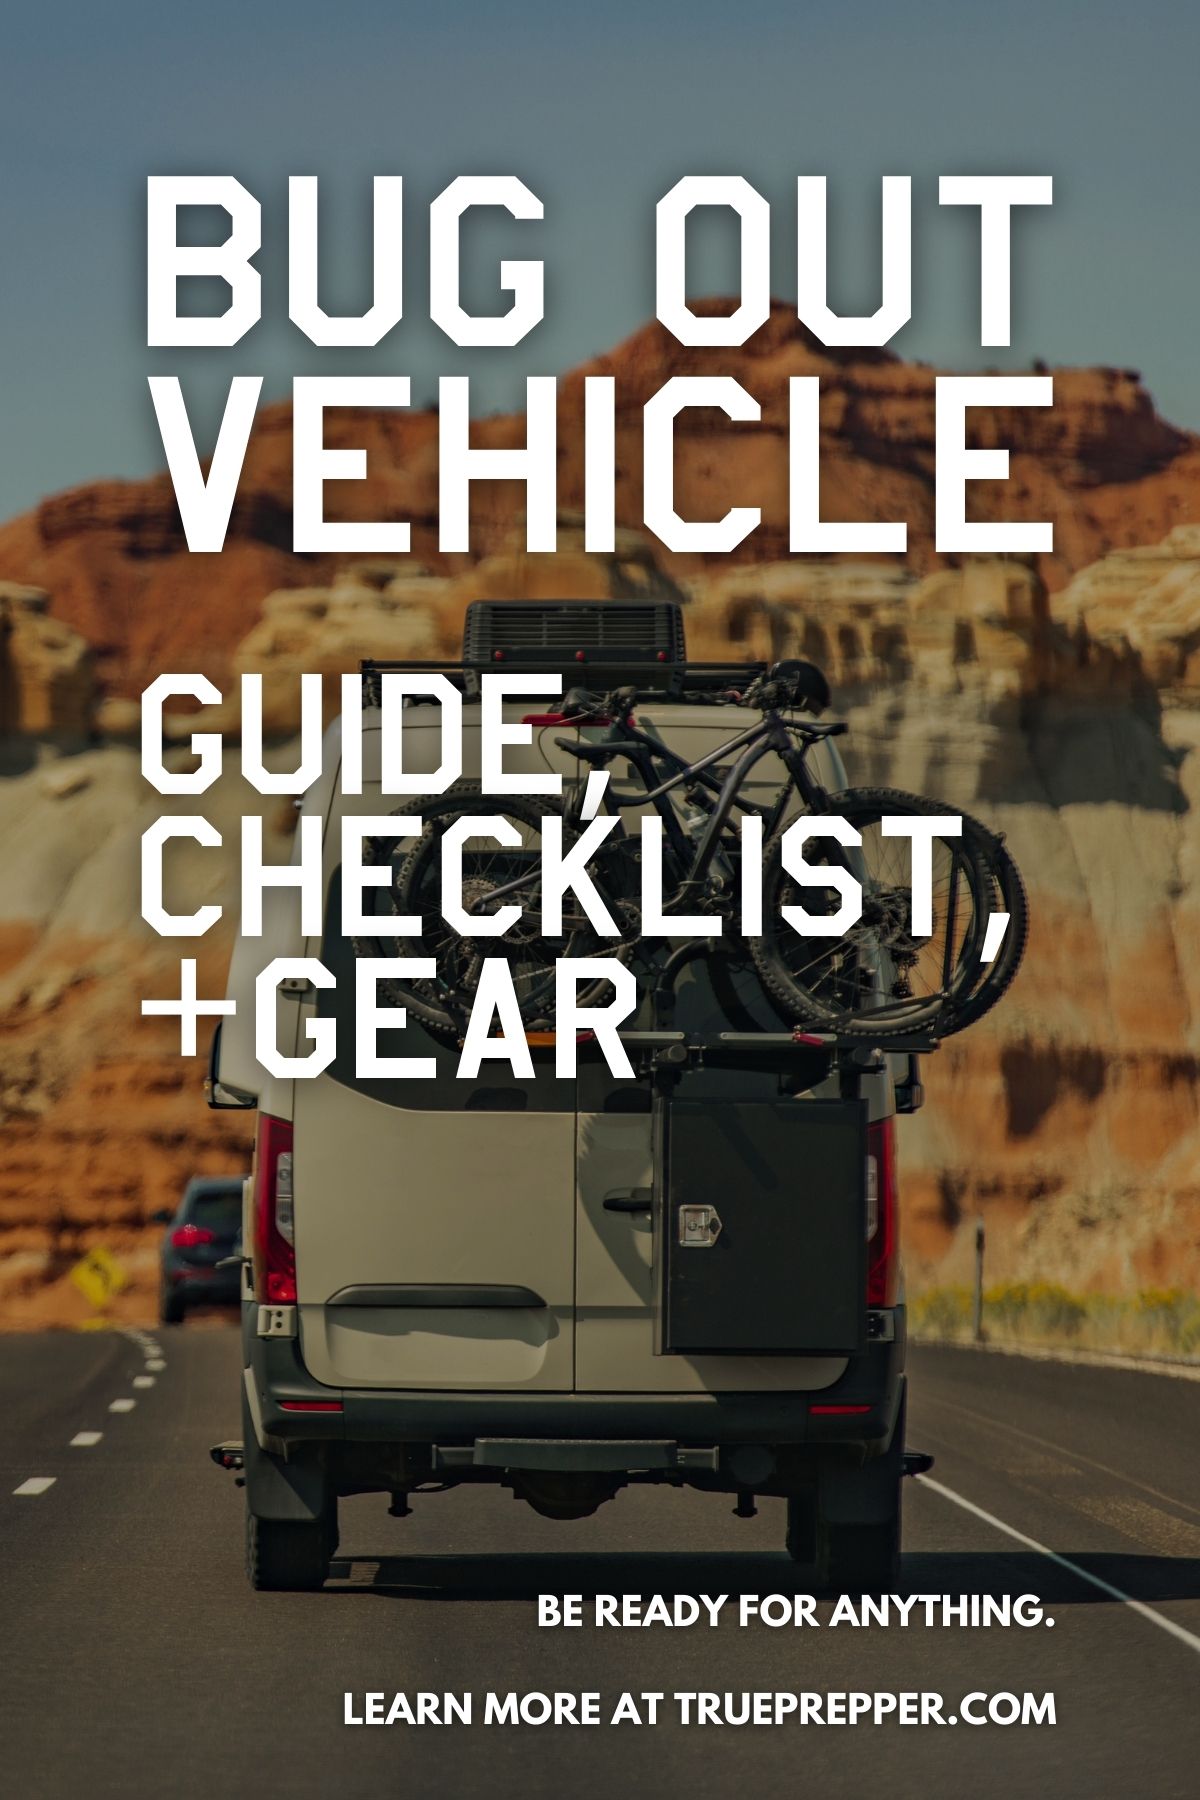 Bug Out Vehicle Guide, Checklist, and Gear